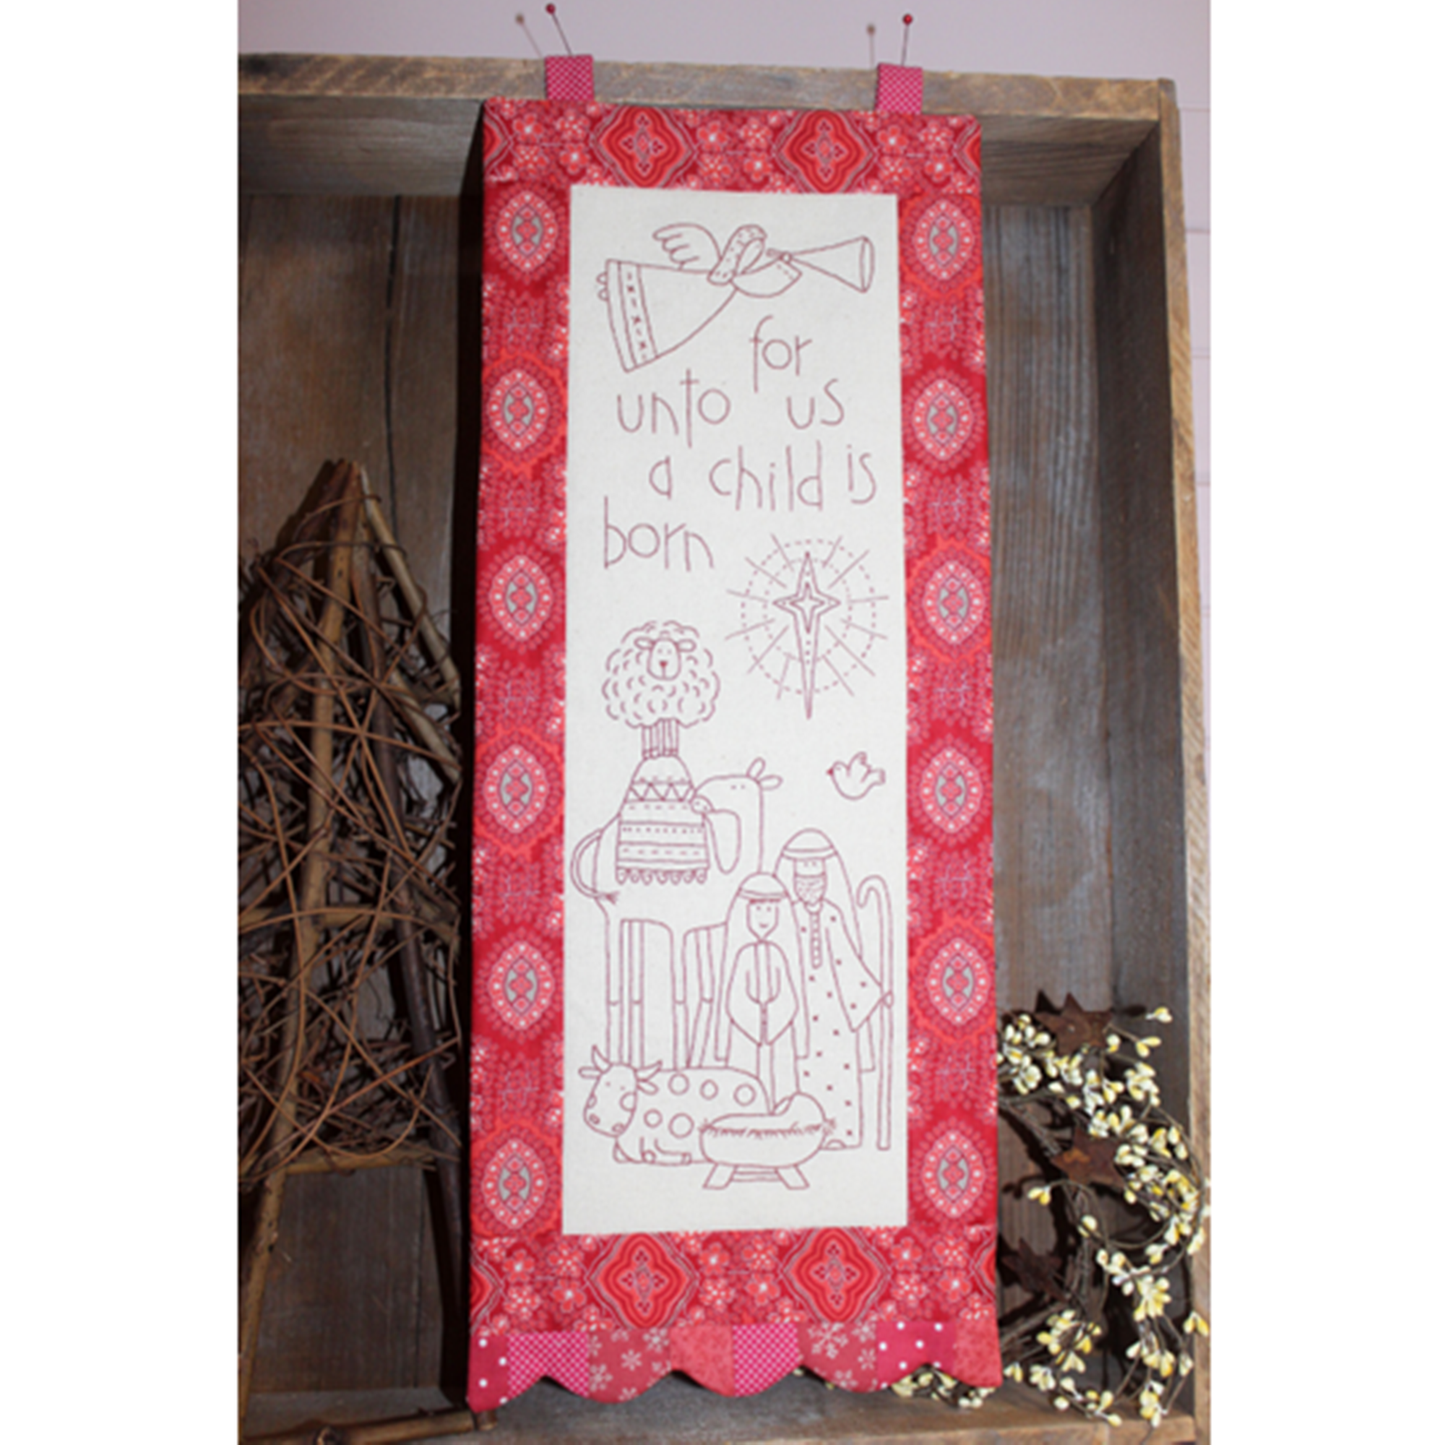 The Nativity pre-printed stitchery embroidery Christmas wallhanging Birdhouse pattern